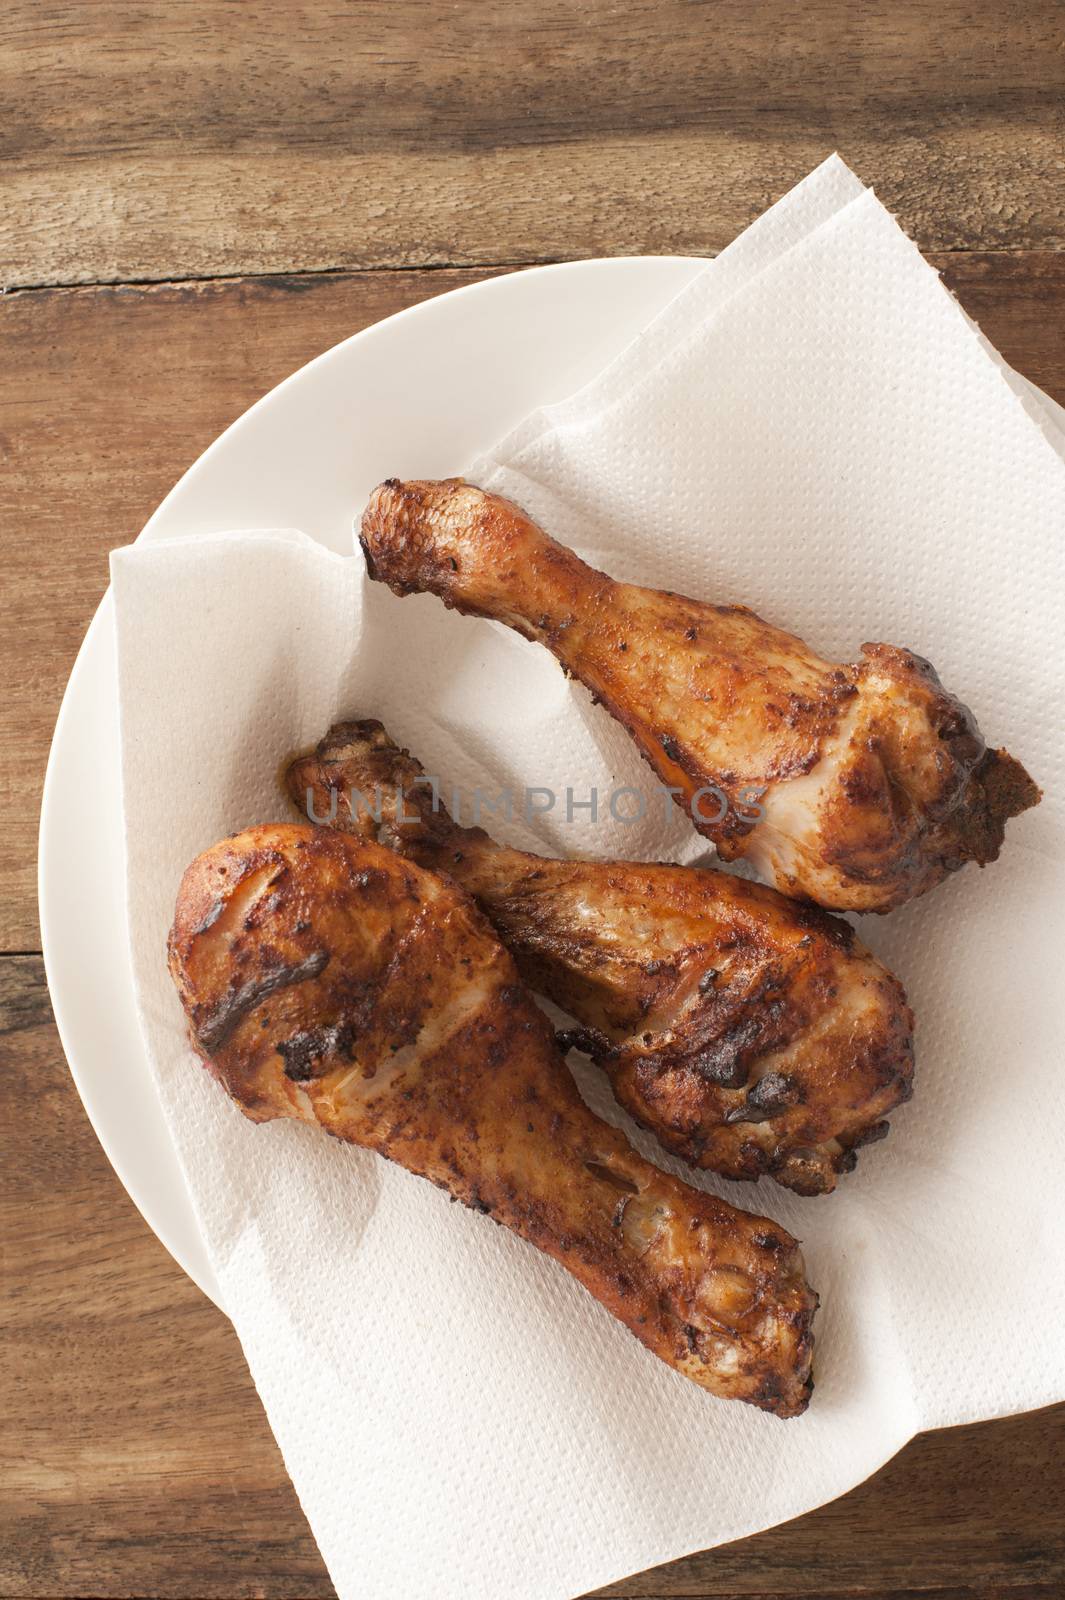 Three spicy grilled chicken legs served on a paper napkin on a plate for a tasty finger snack , overhead view on a wooden table